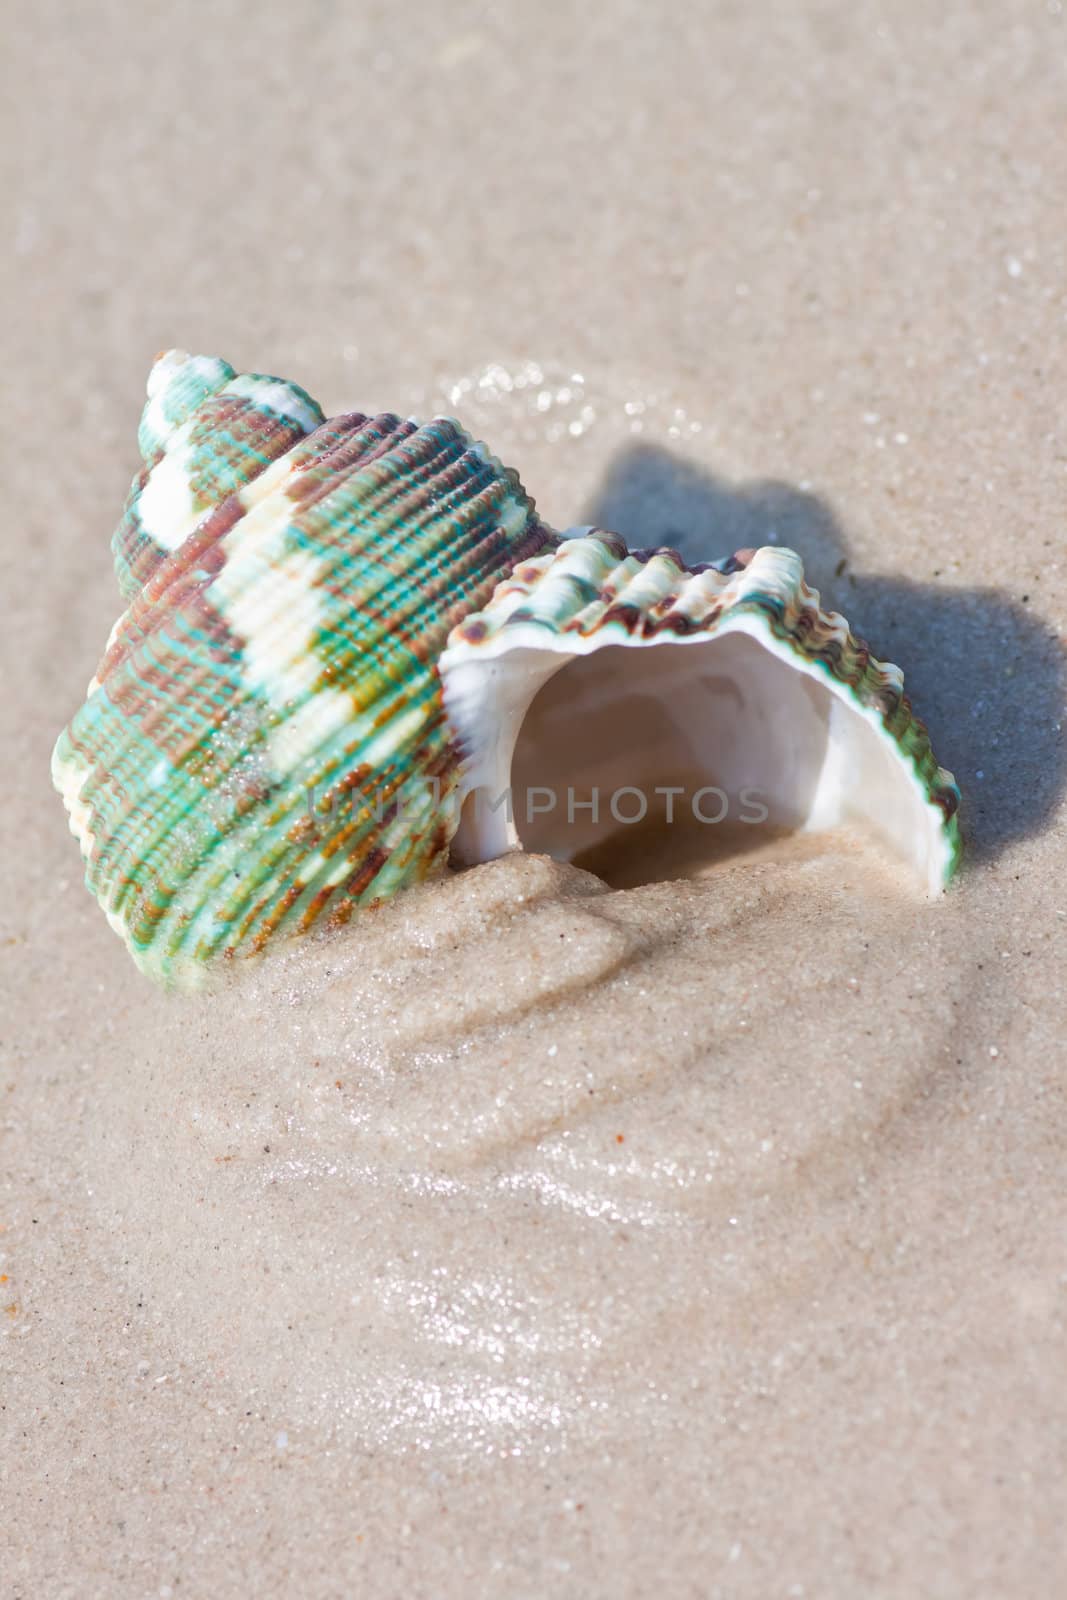 Seashells on the sand. by nikky1972